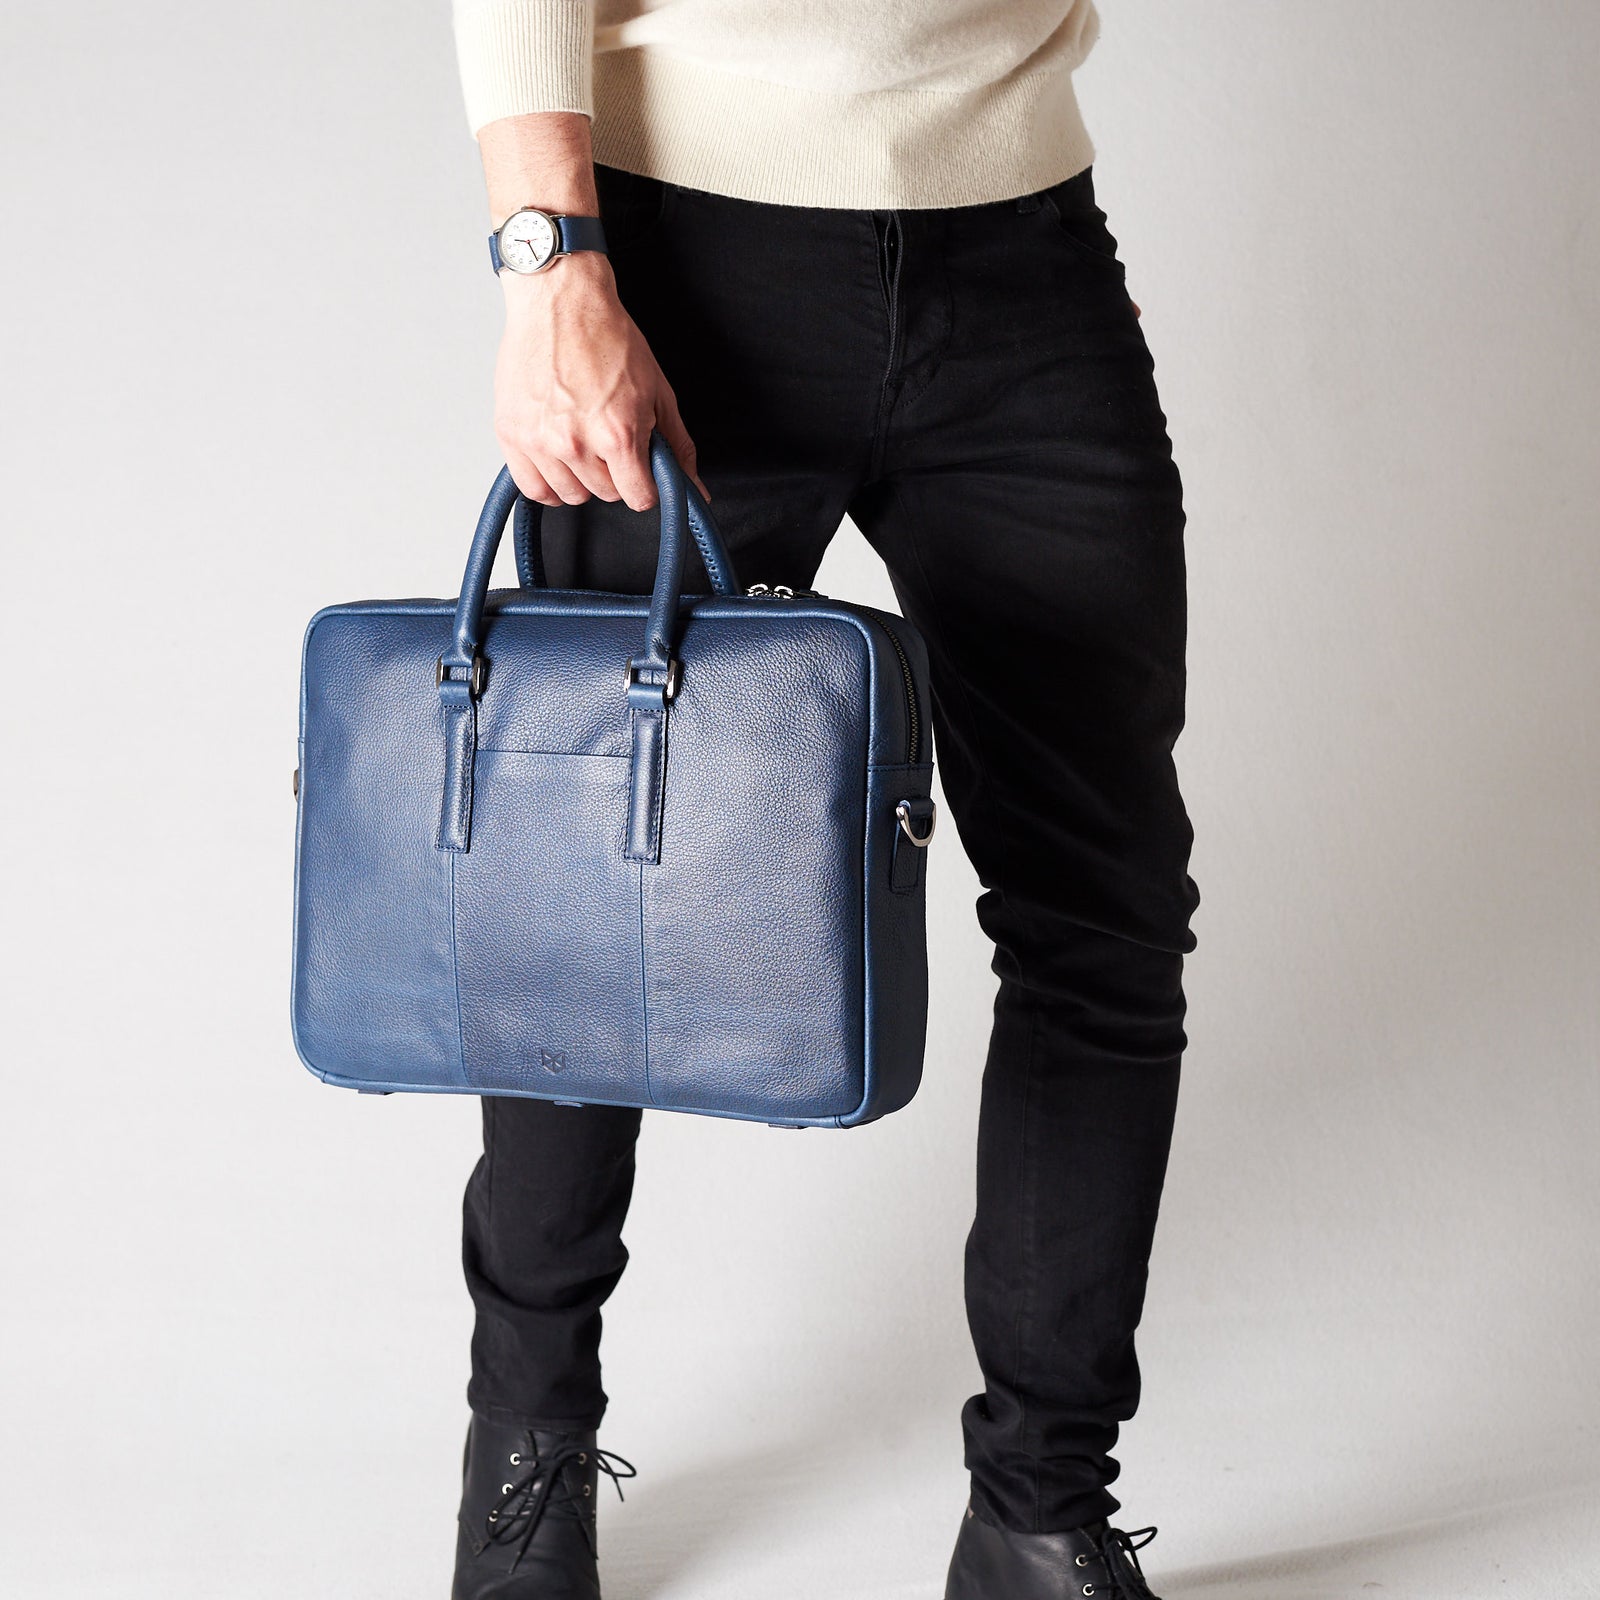 Style view, model holding bussiness document portfolio bag .Blue leather briefcase laptop bag for men. Gazeli laptop briefcase by Capra Leather.